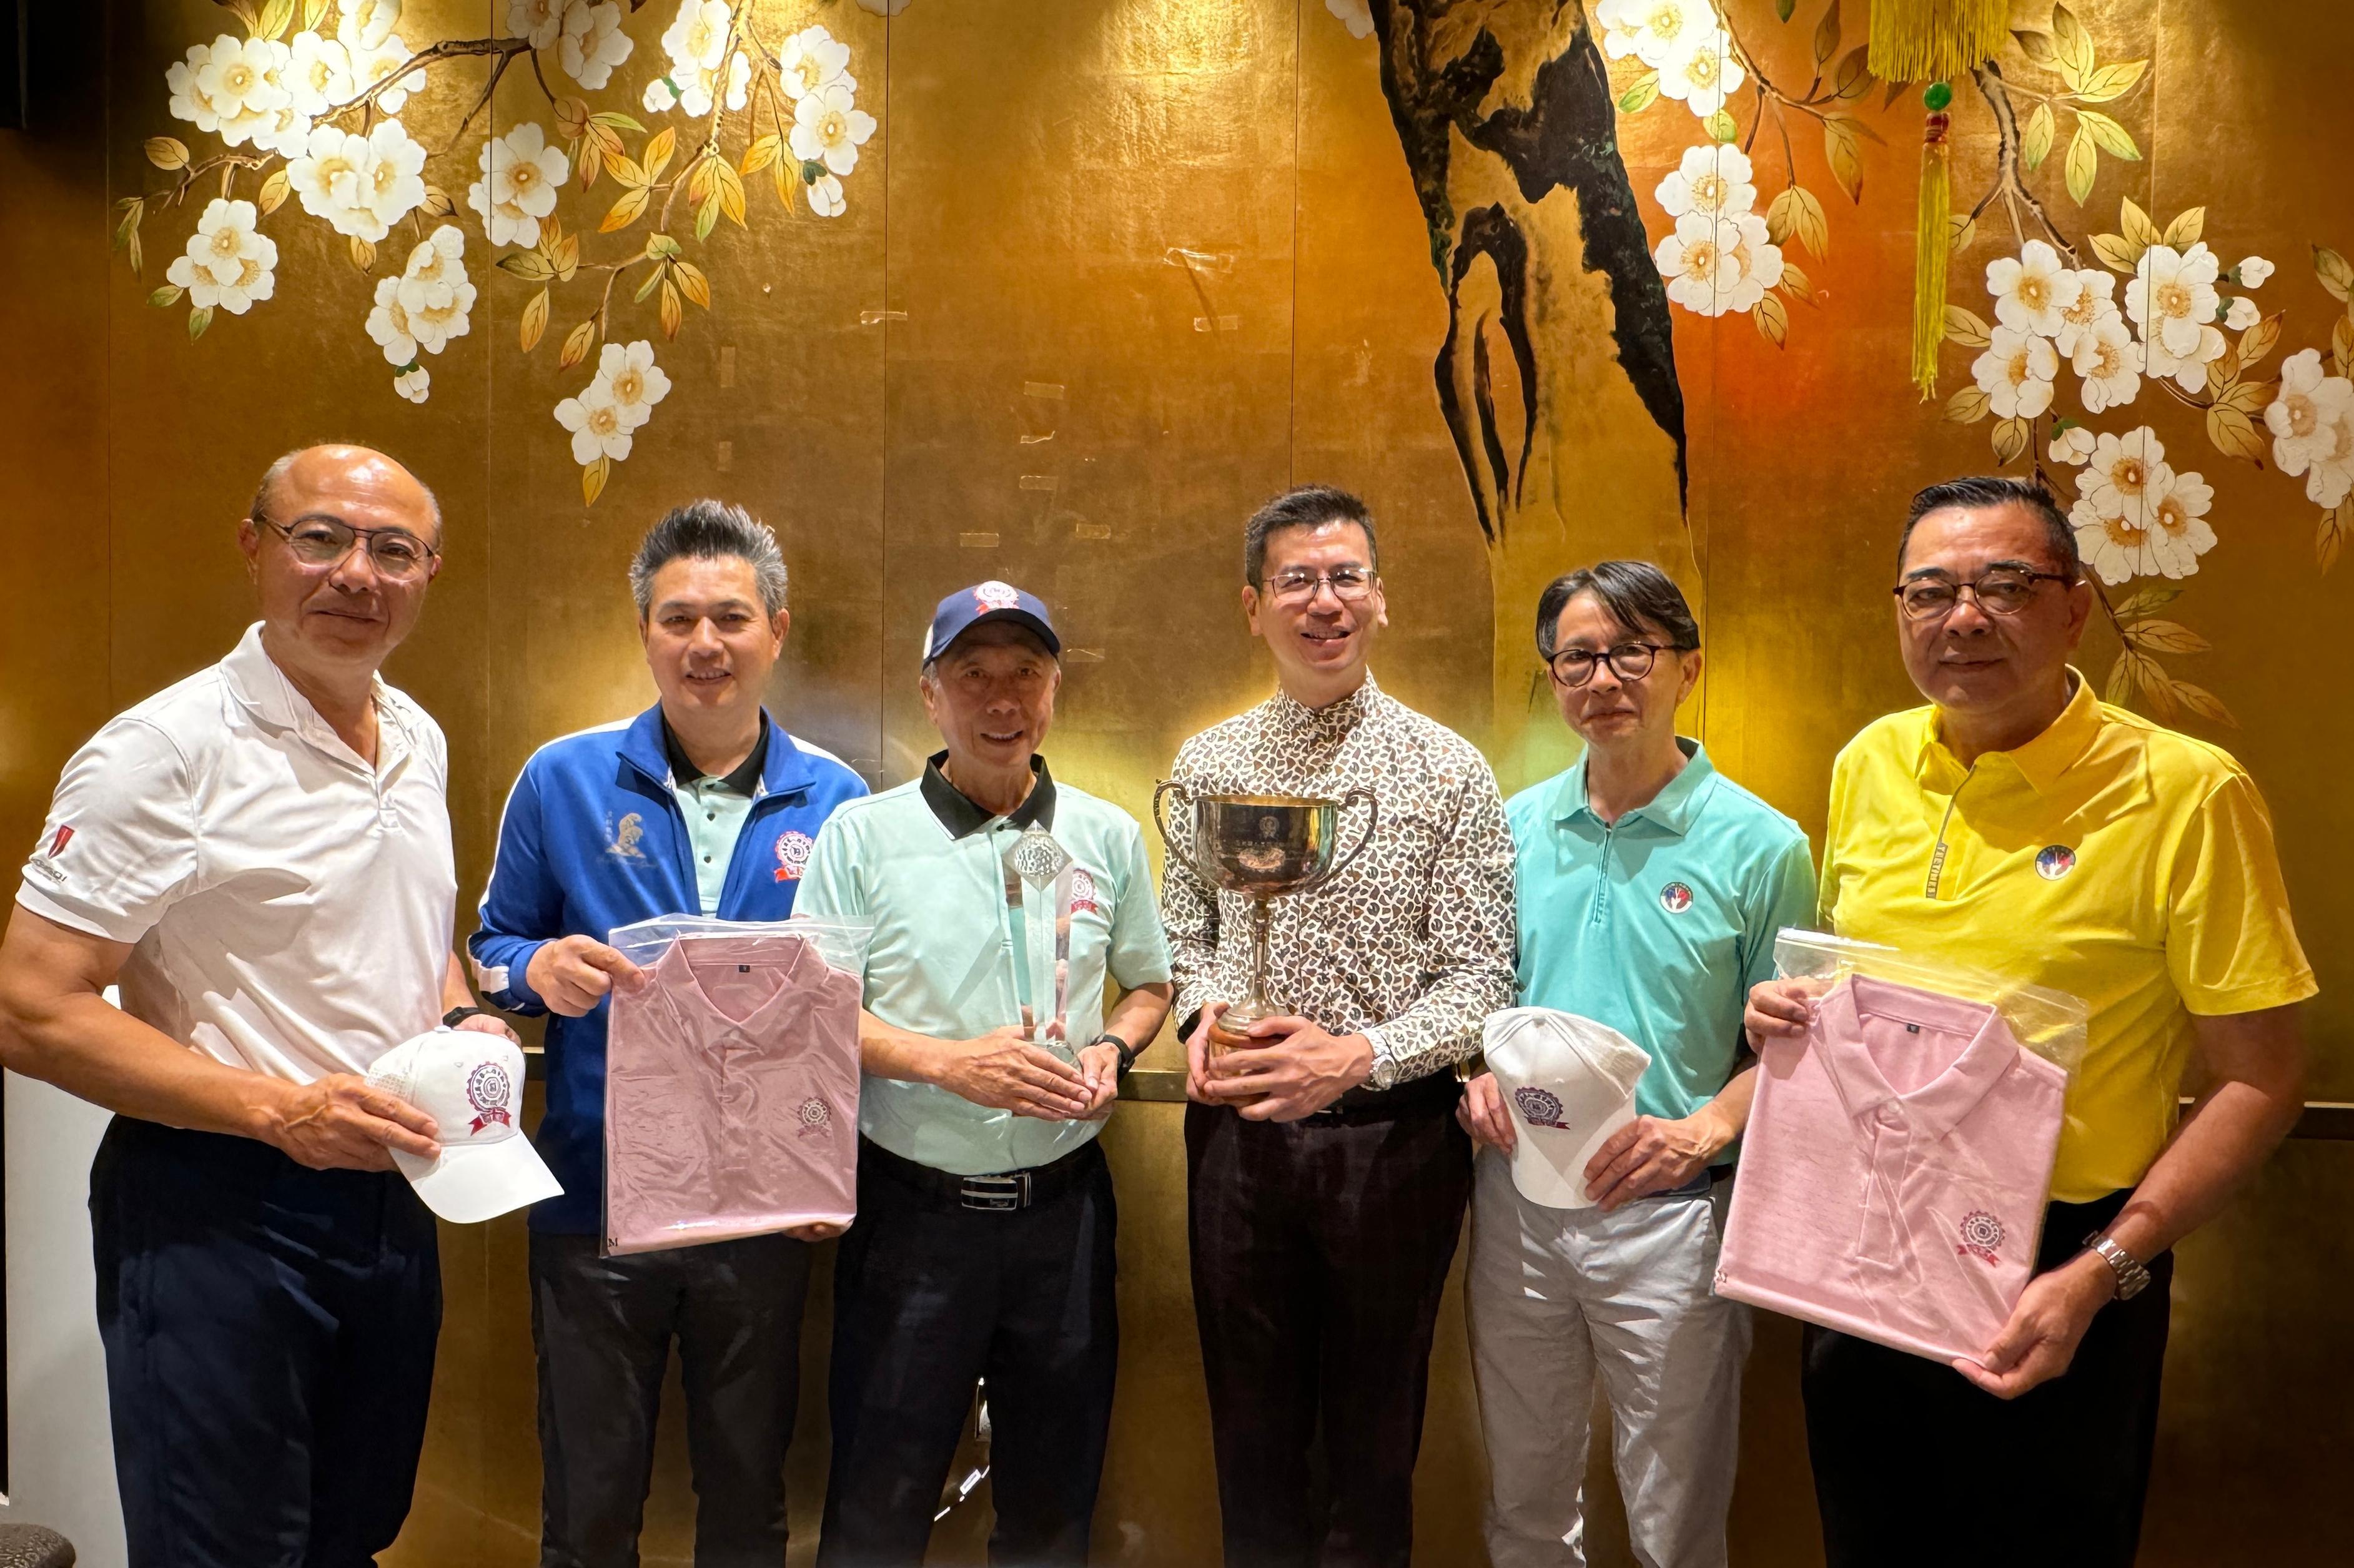 To commemorate the 27th anniversary of the establishment of Hong Kong Special Administrative Region, the Hong Kong Economic and Trade Office, London (London ETO) supported the 24th UK Chinese Golf Open 2024 by sponsoring the Reunification Cup special prize. Photo shows the Director-General of the London ETO, Mr Gilford Law (third right), and committee members at the event.